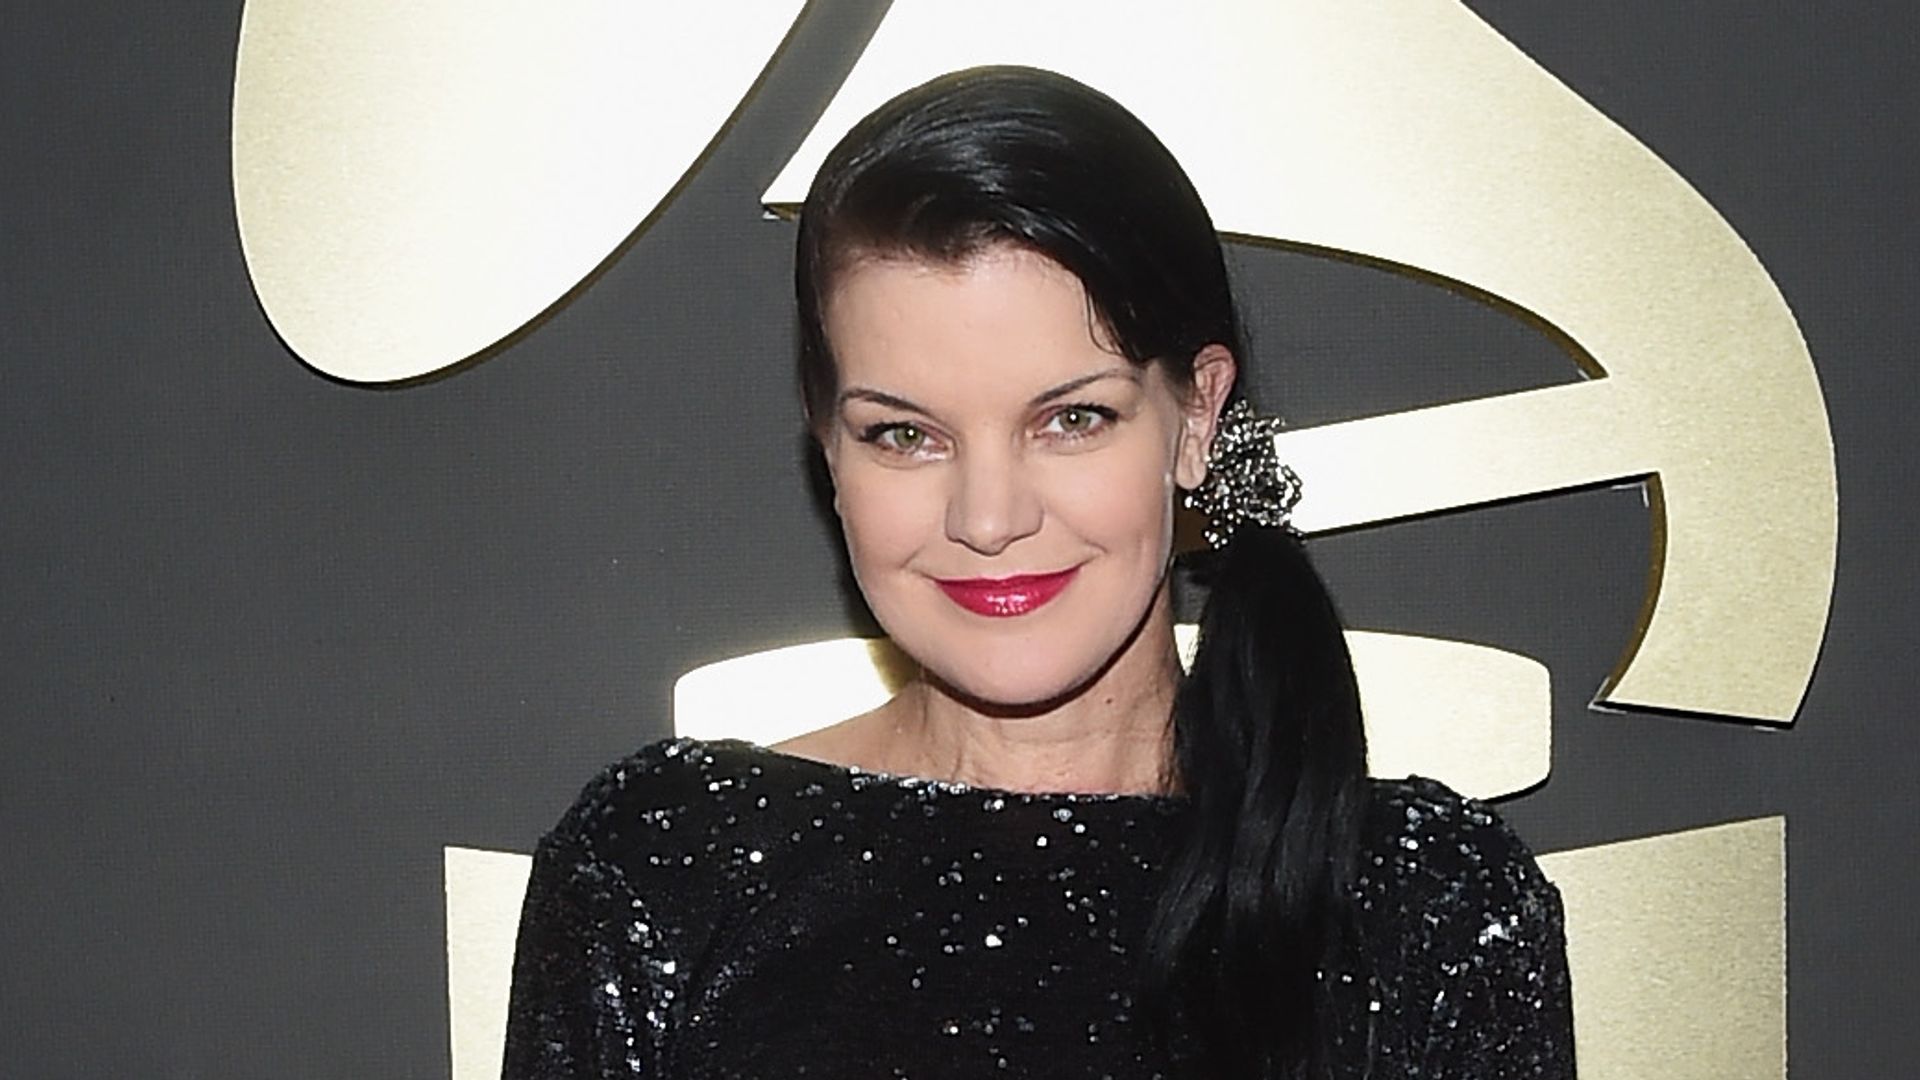 Pauley Perrette attends The 57th Annual GRAMMY Awards at the STAPLES Center in 2015